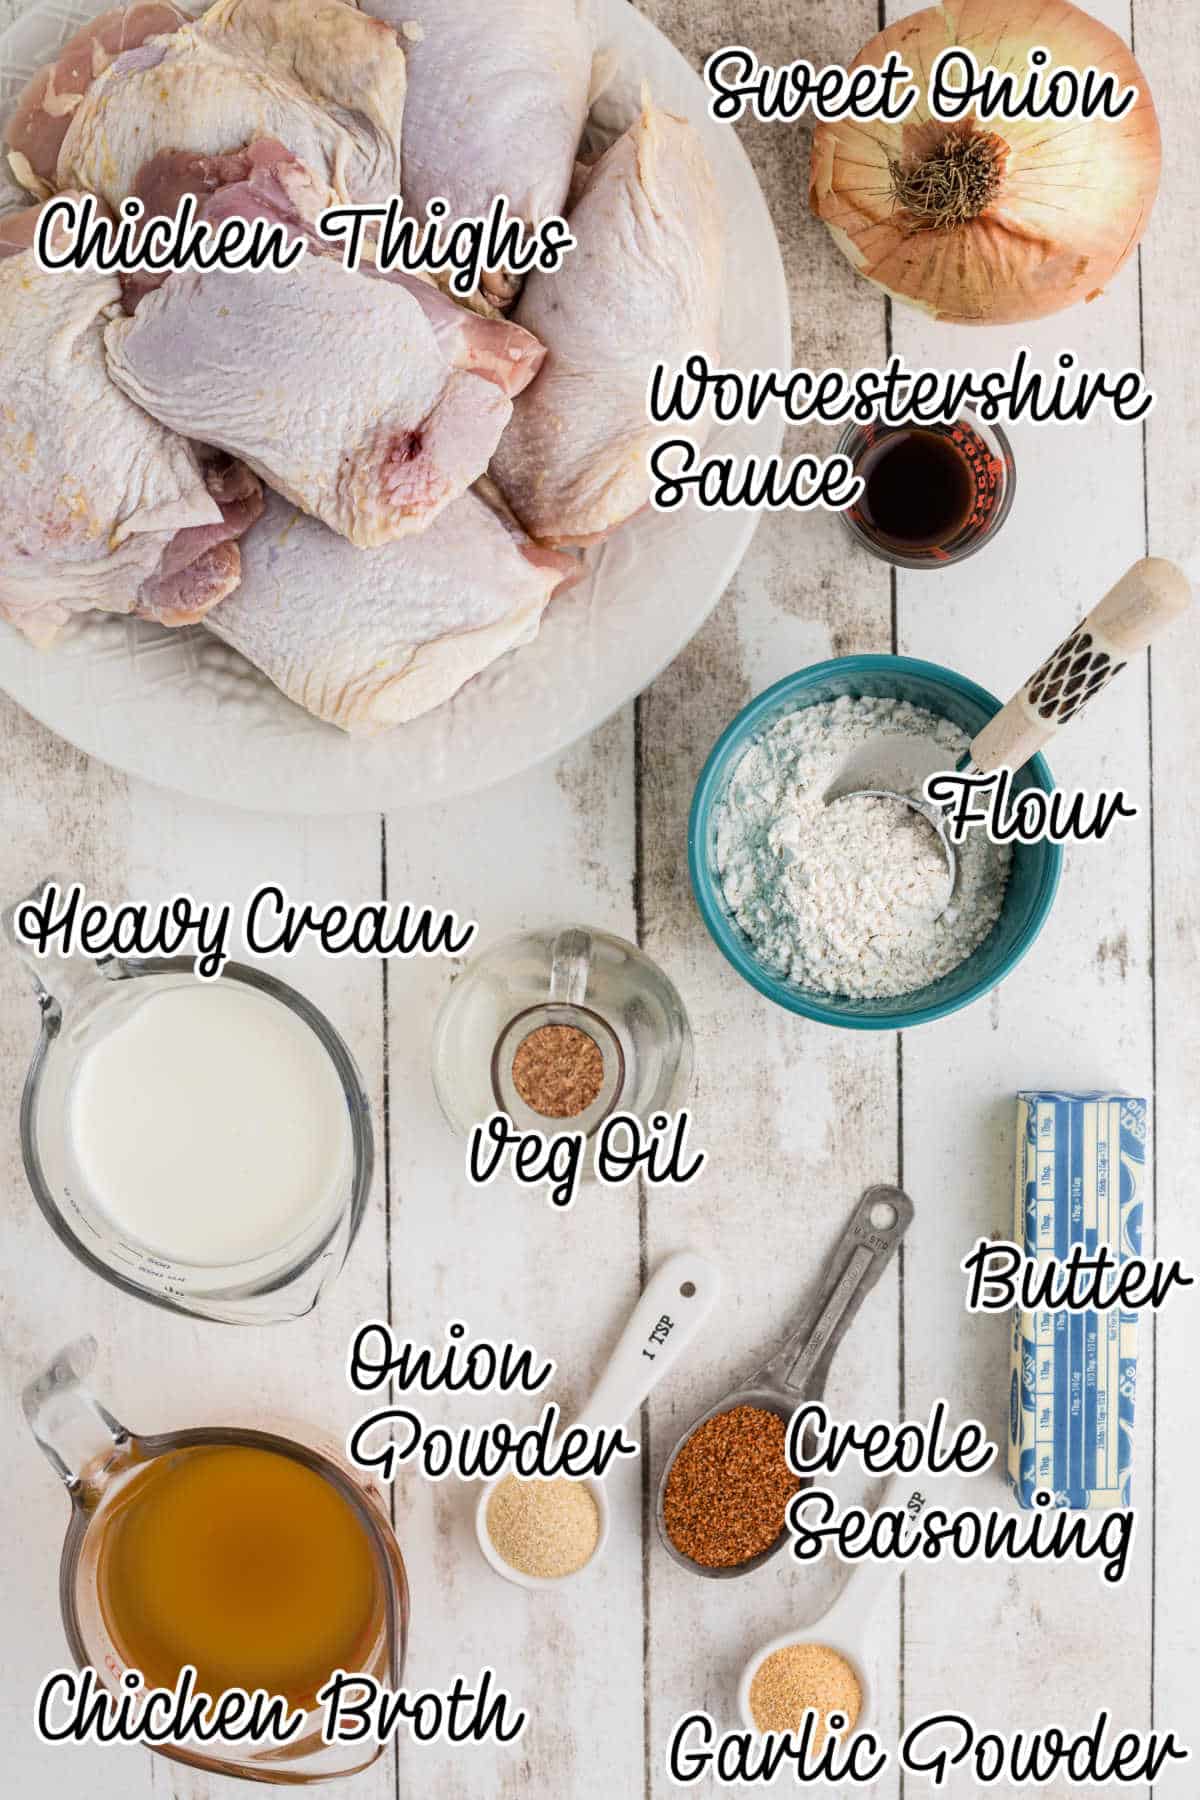 Overhead view of ingredients needed to make smothered chicken.